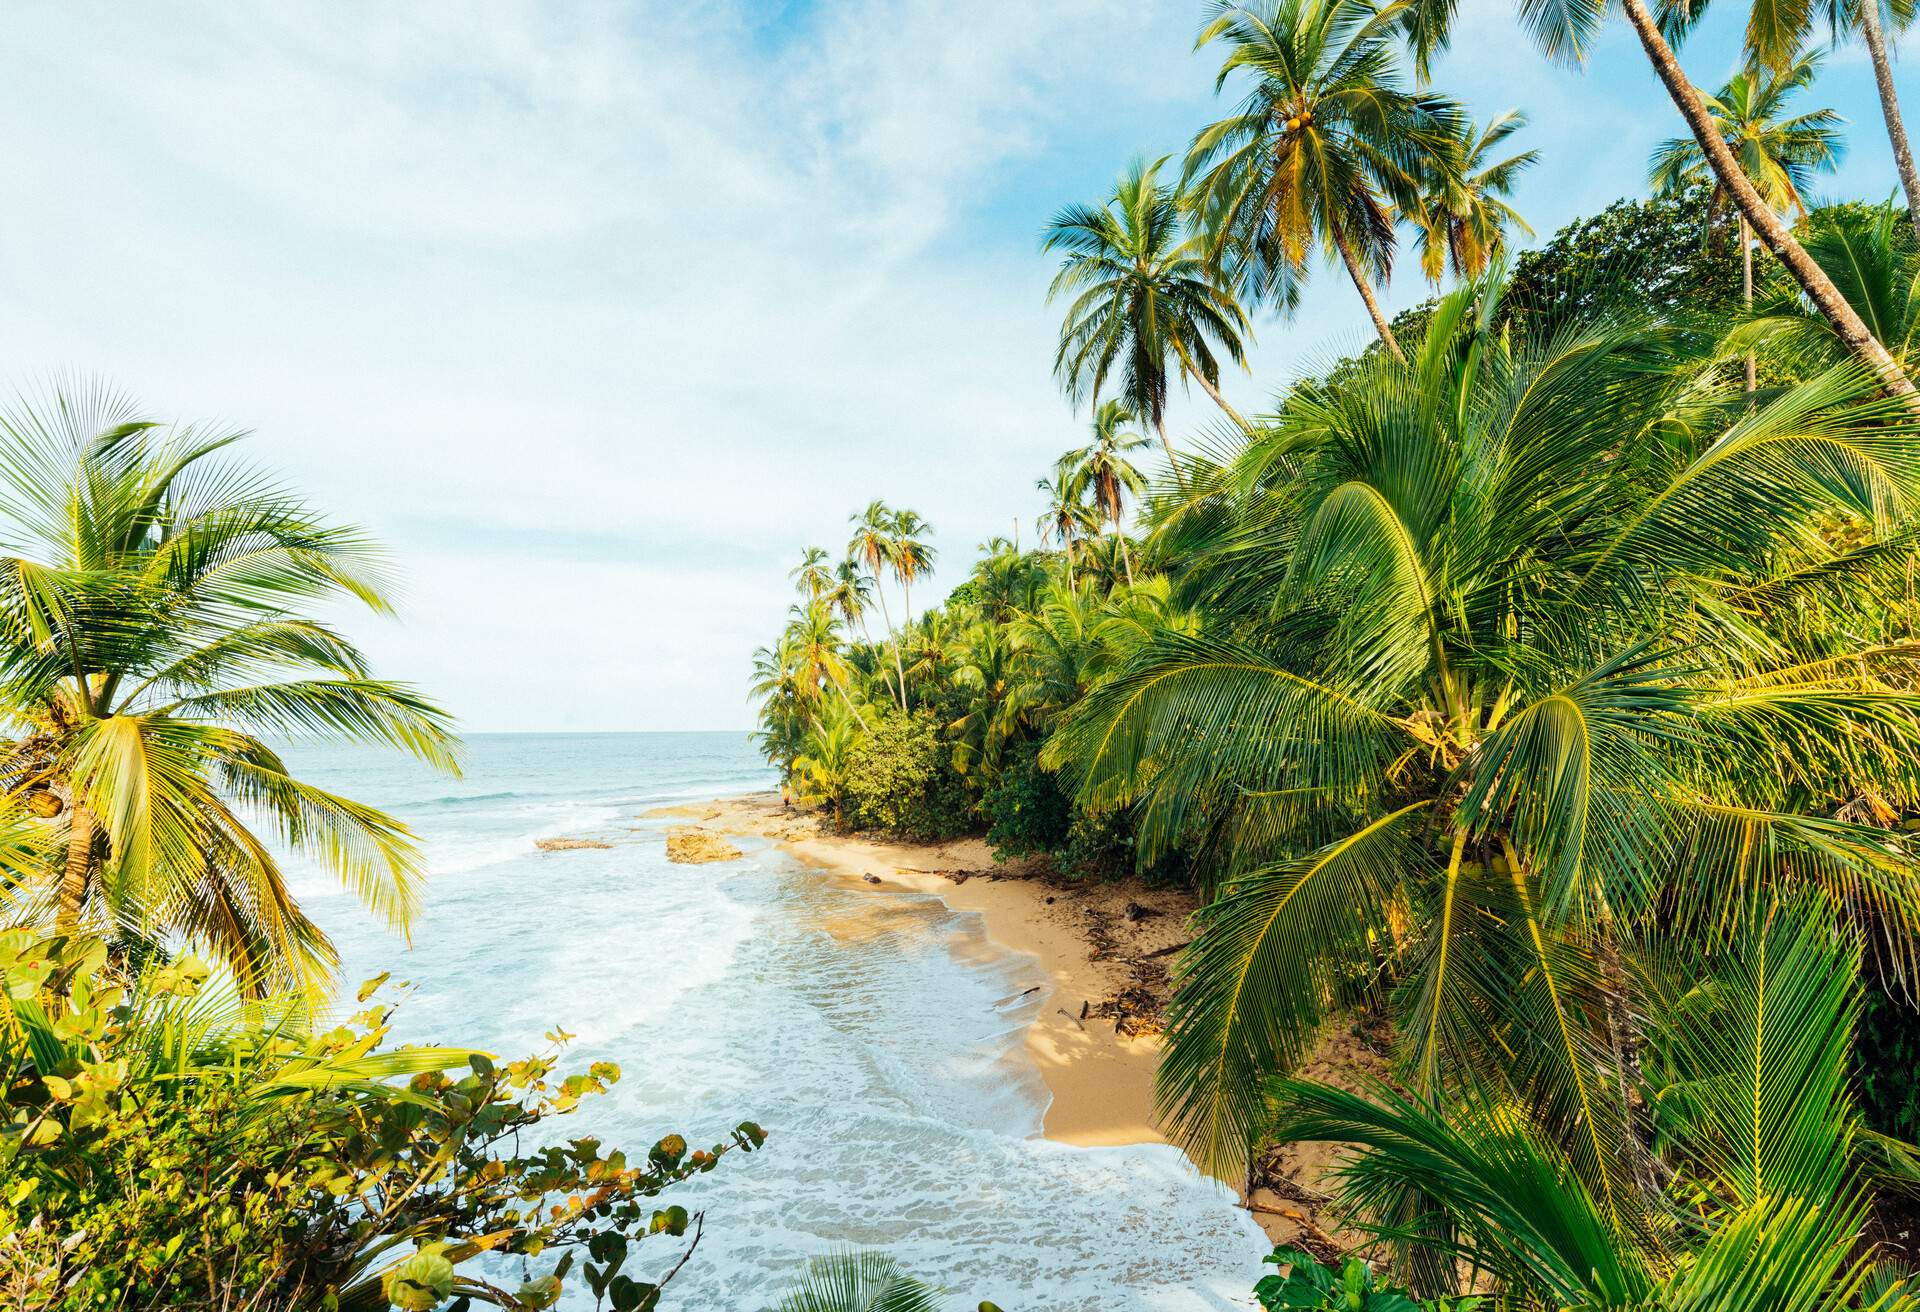 This is a horizontal, color, royalty free stock photograph of a tranquil bay in a remote tropical beach along the Caribbean coast in the Limon province of Costa Rica. This idyllic landscape is part of the Gandoca Manzanillo National Park. Palm trees line the shore of the sea. Photographed from a high angle view with a Nikon D800 DSLR camera.